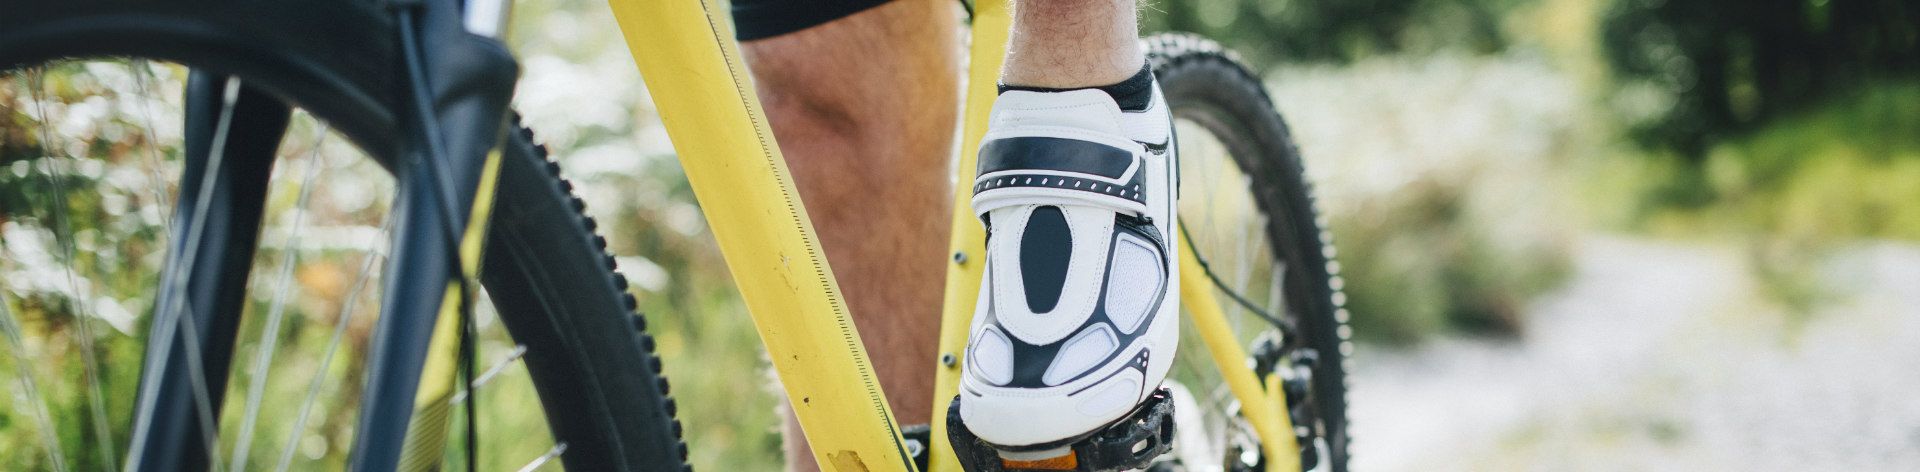 chaussures cyclisme hommes